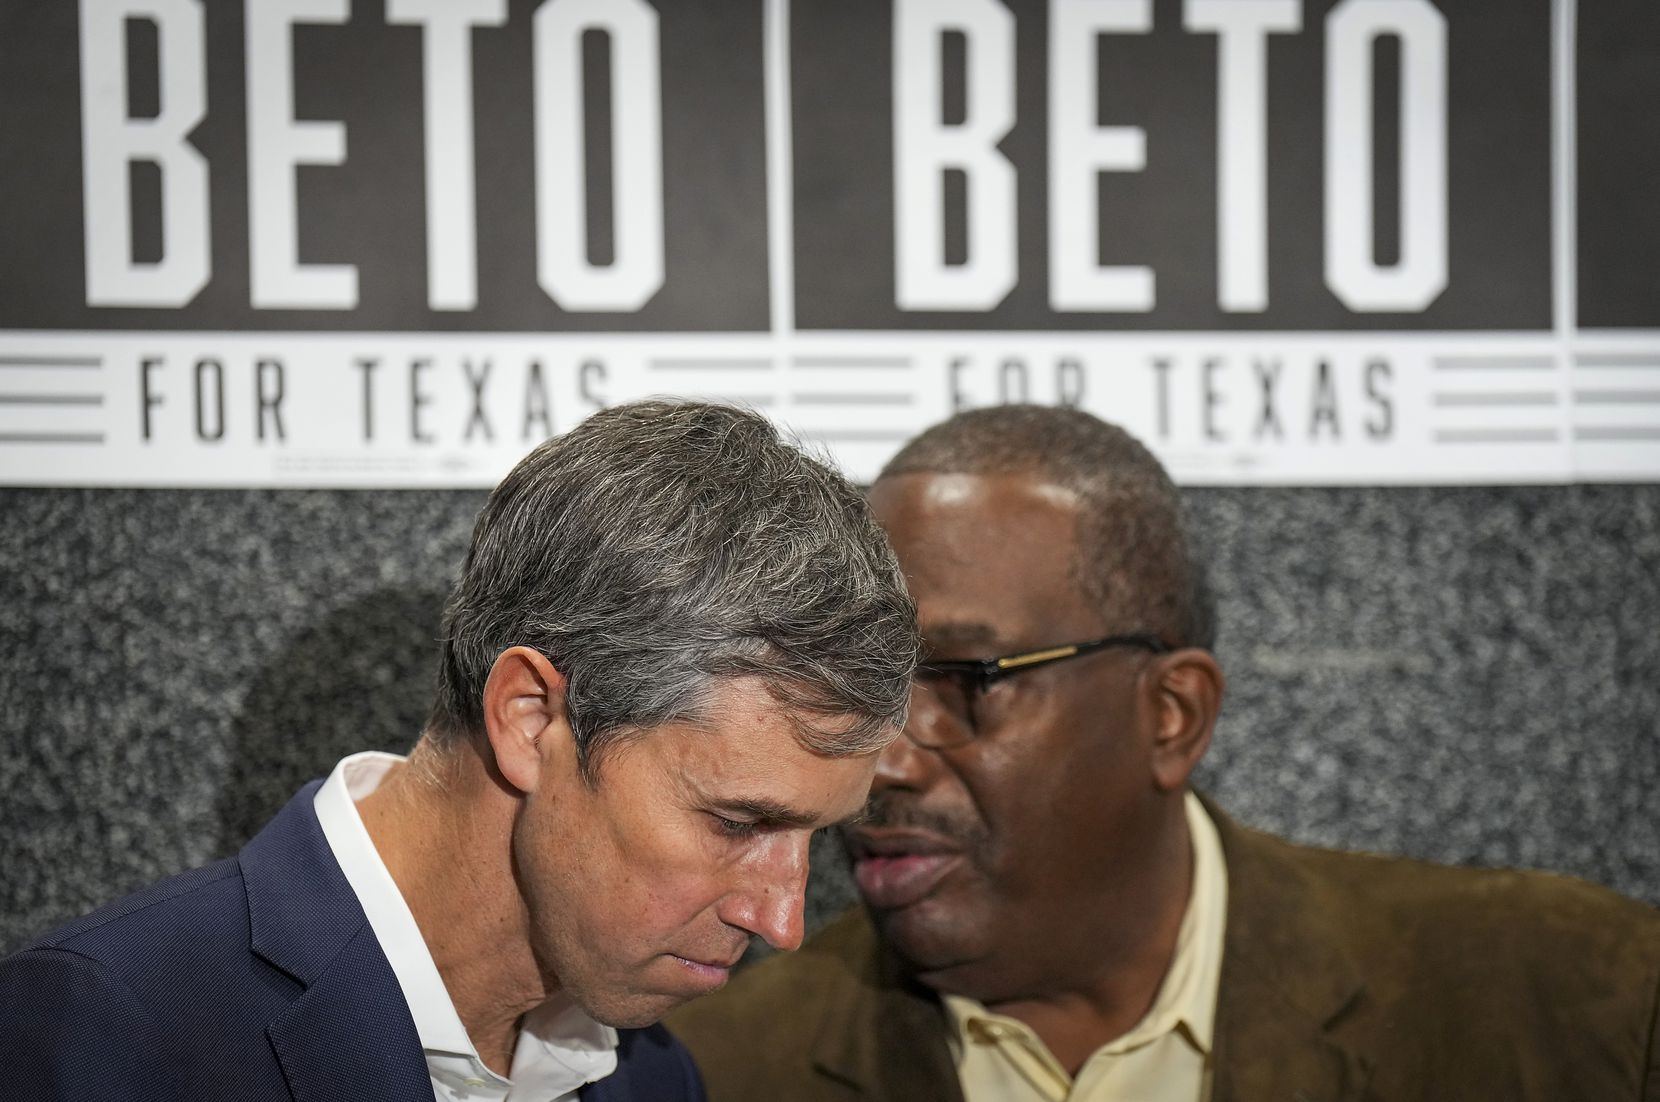 Democratic candidate for governor Beto O'Rourke listens as State Sen. Royce West whispers in his ear during a press conference following O’Rourke’s meeting with Black elected leaders at Paul Quinn College on Monday, Feb. 7, 2022, in Dallas.(Smiley N. Pool / Staff Photographer)